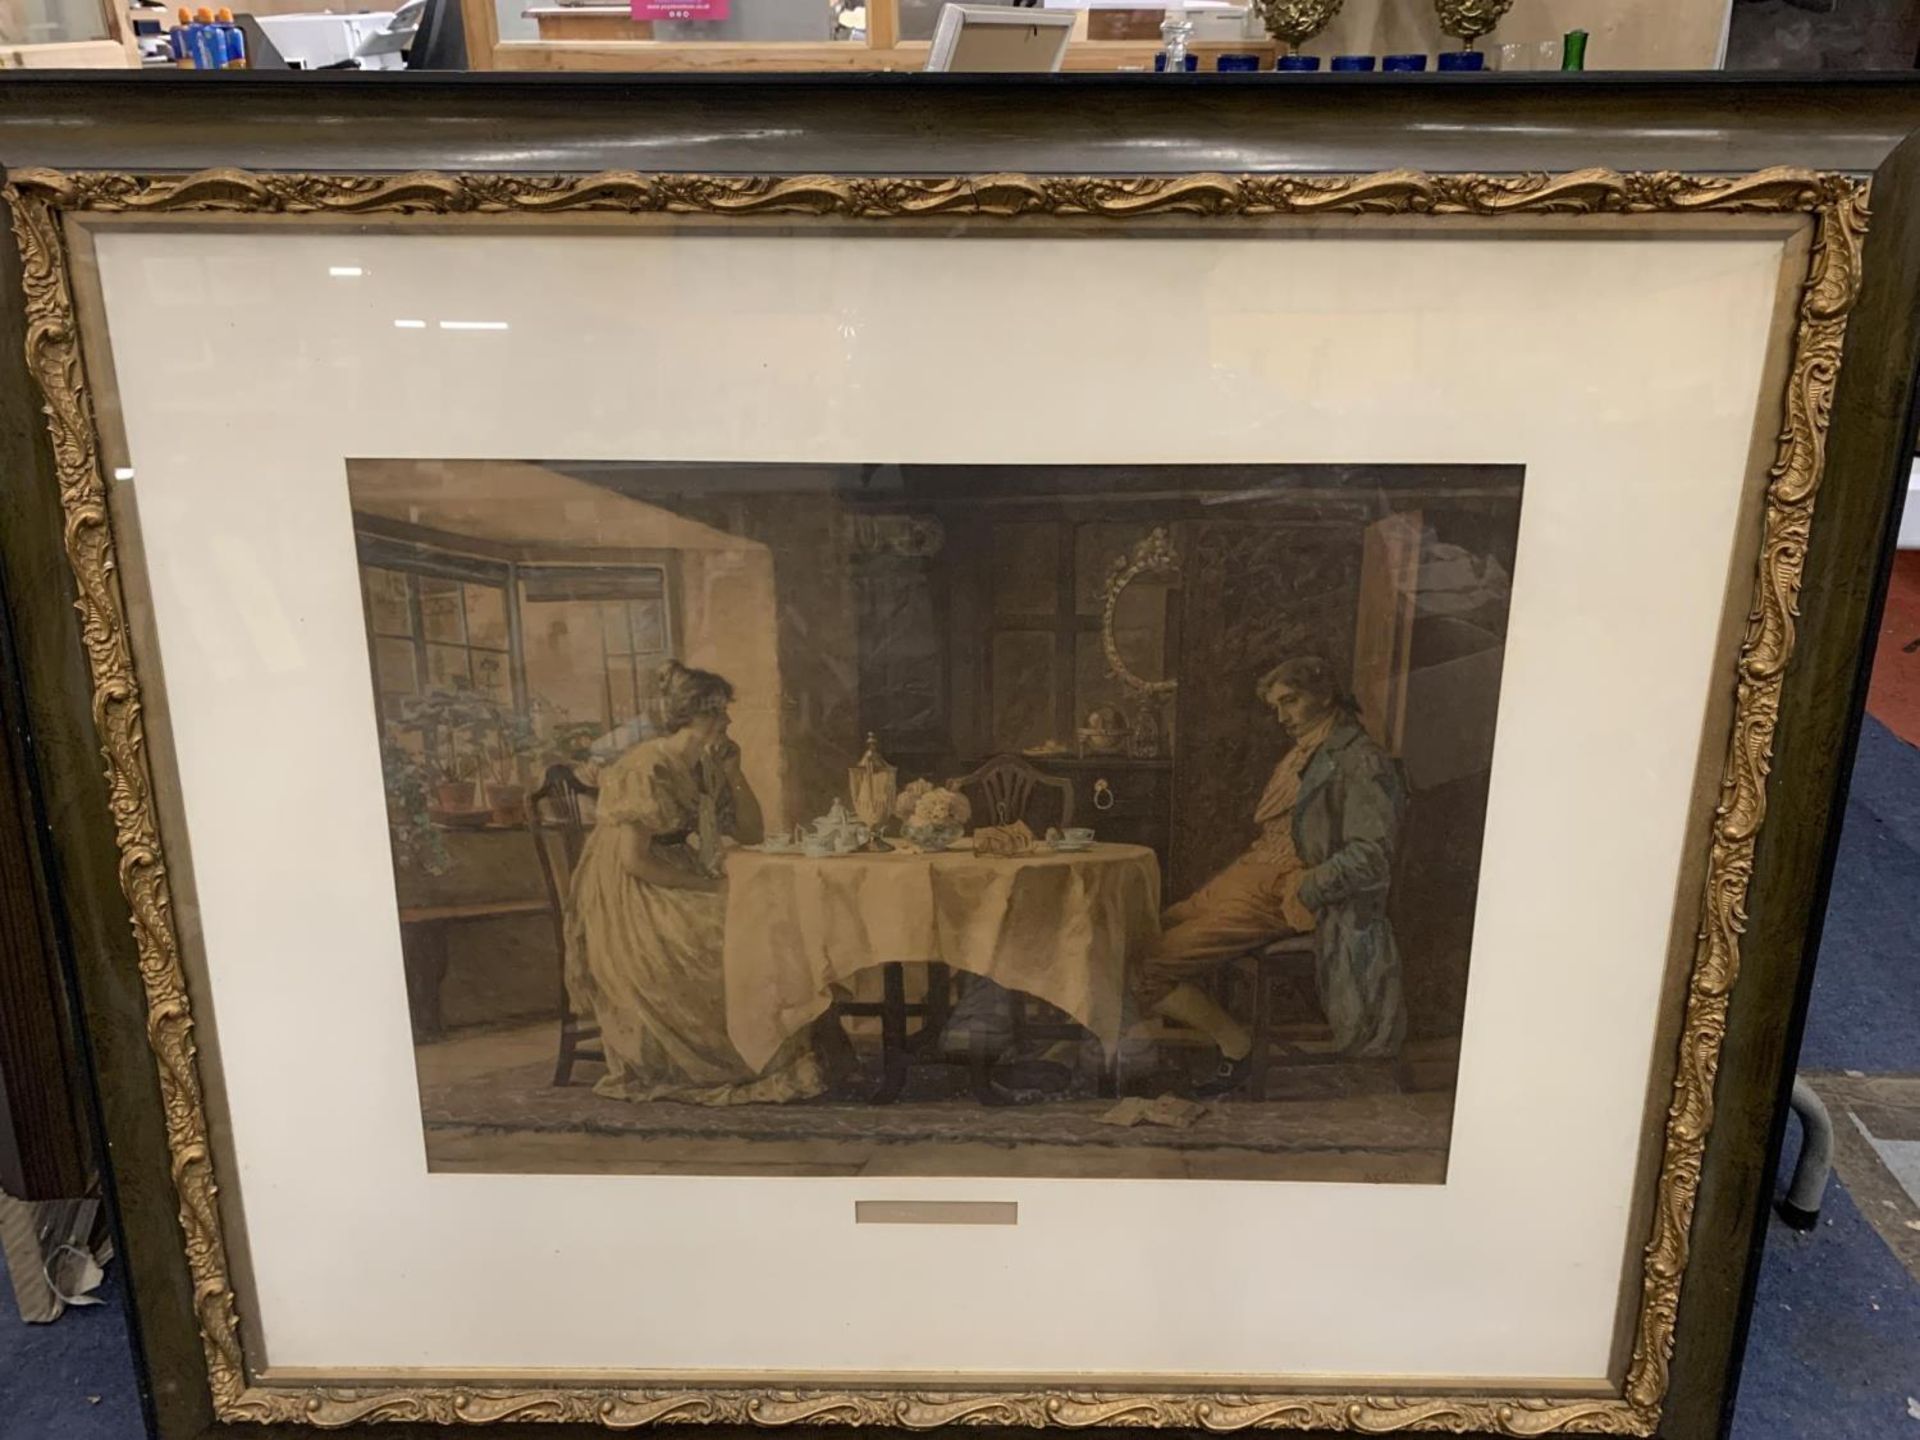 A VERY LARGE VINTAGE PRINT 'DISINHERITED' IN A WOOD AND GILT FRAME, 115CM X 96CM